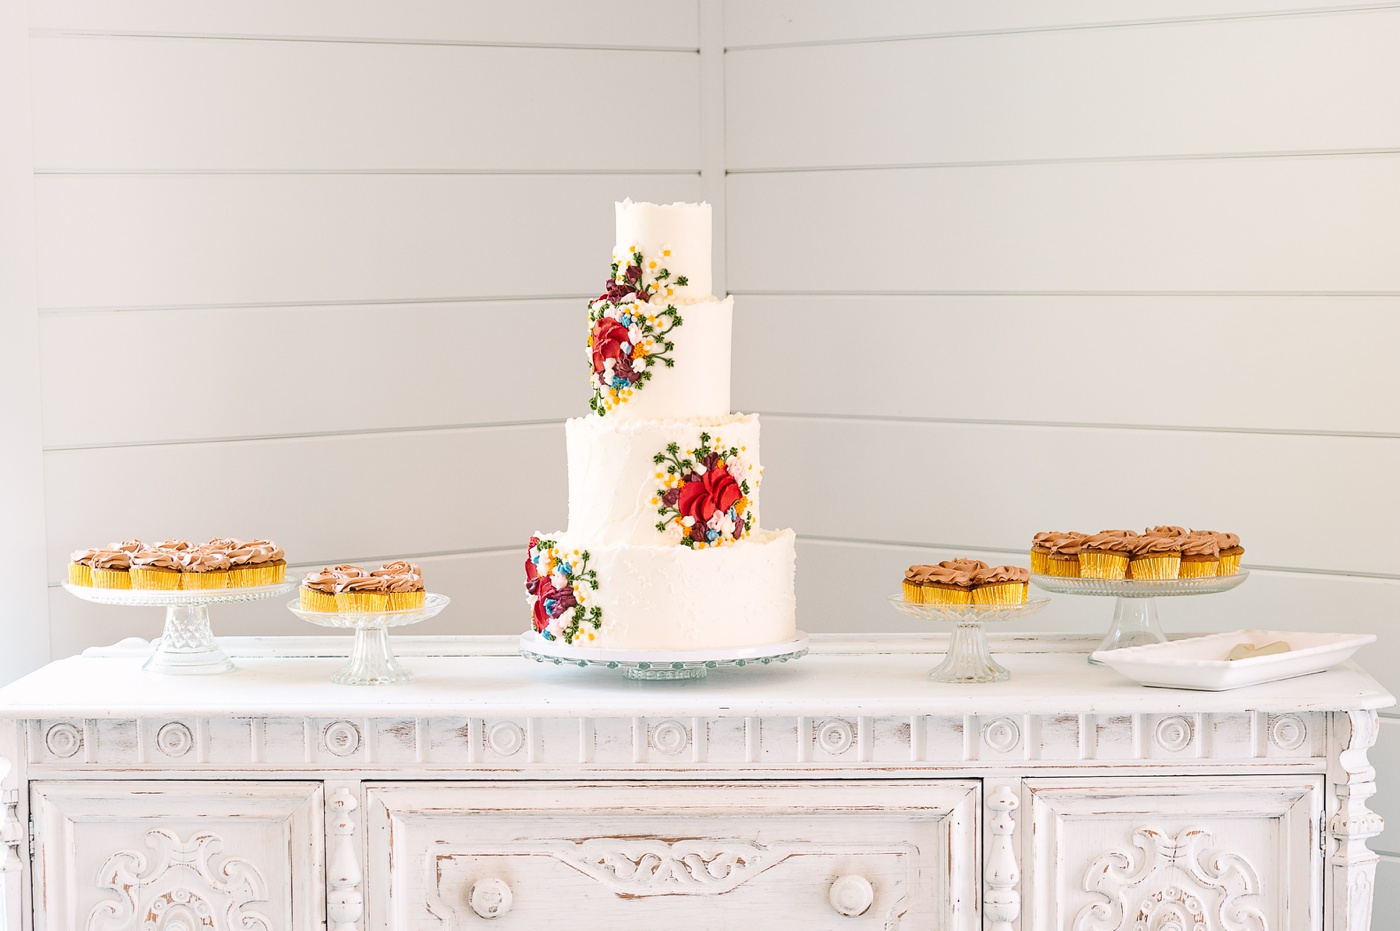 Wildflower wedding cake with frosting flowers by Farmhouse Cakes